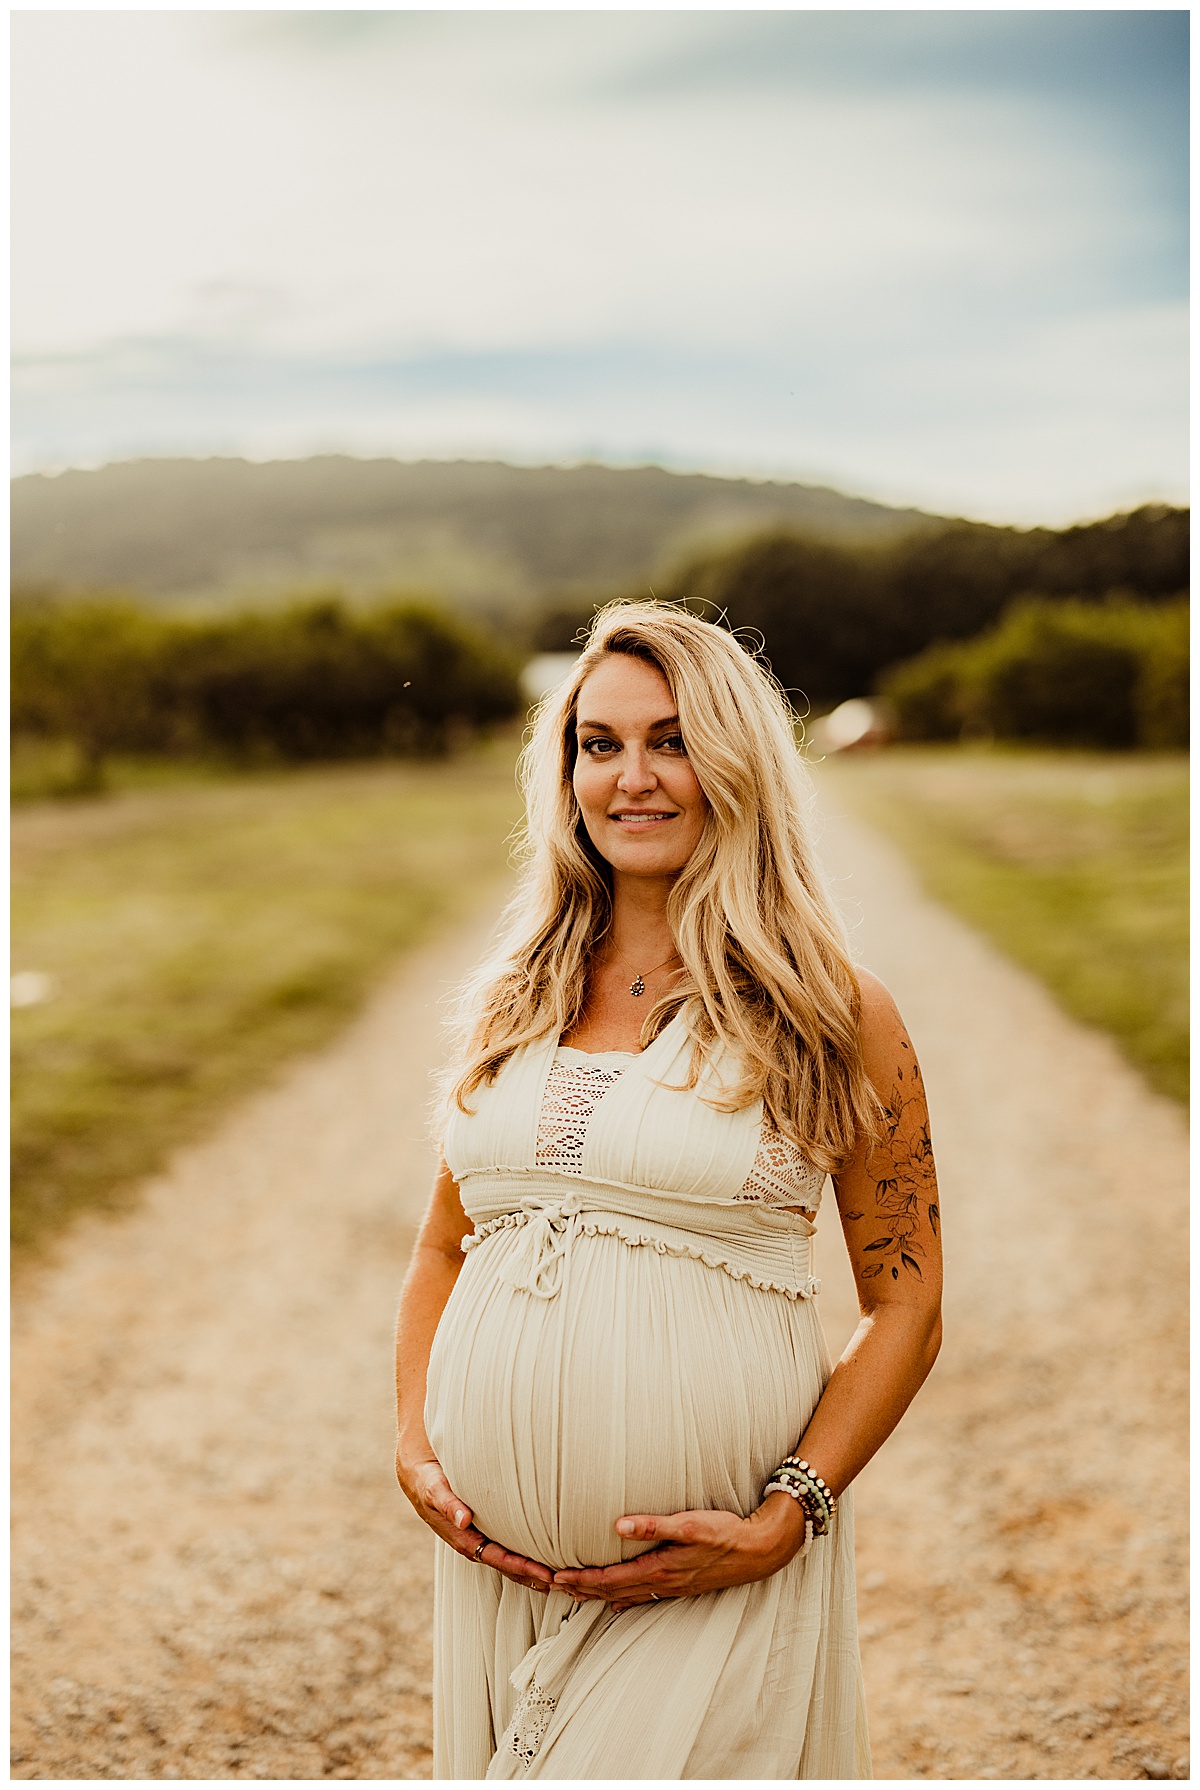 Mom smiling in road for Washington DC Maternity Photographer